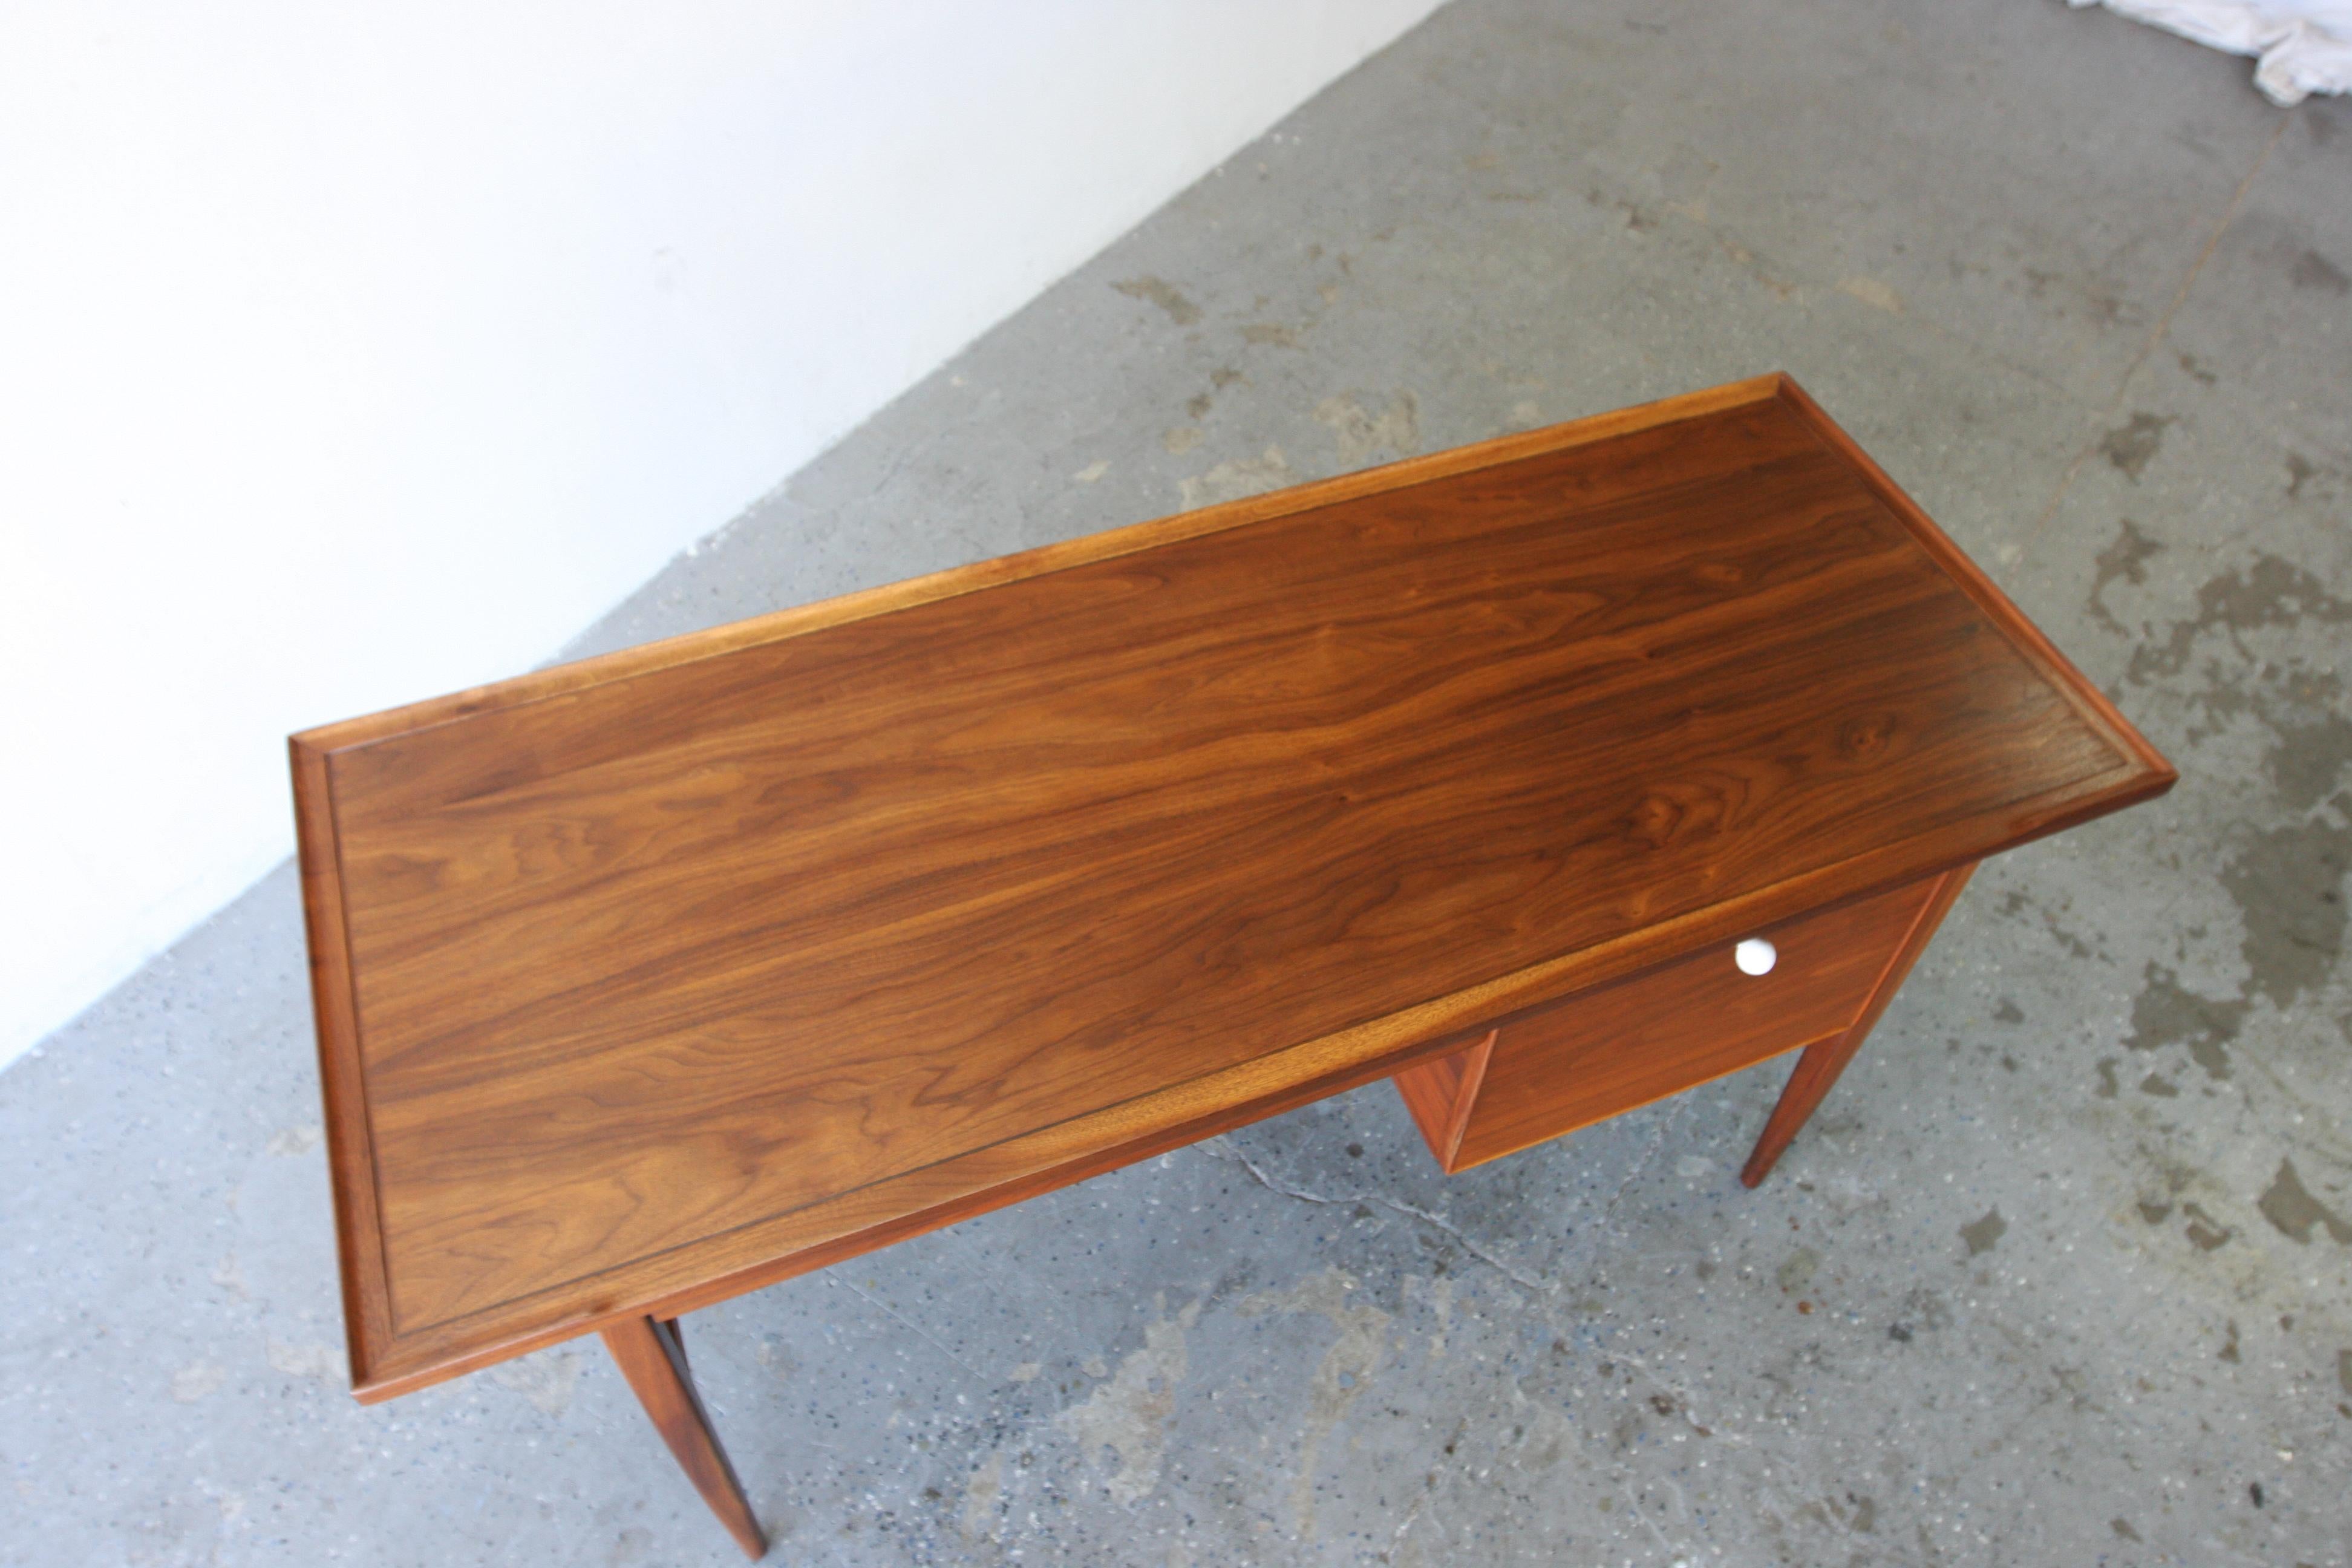 Look at this beautiful wood grained Mid century modern writing desk designed by Kipp Stewart for Drexel. Beautiful walnut grain with 2 drawers. Simple lines, sculpted legs, curved edge and finished back.

Professionally refinished, and restored

60